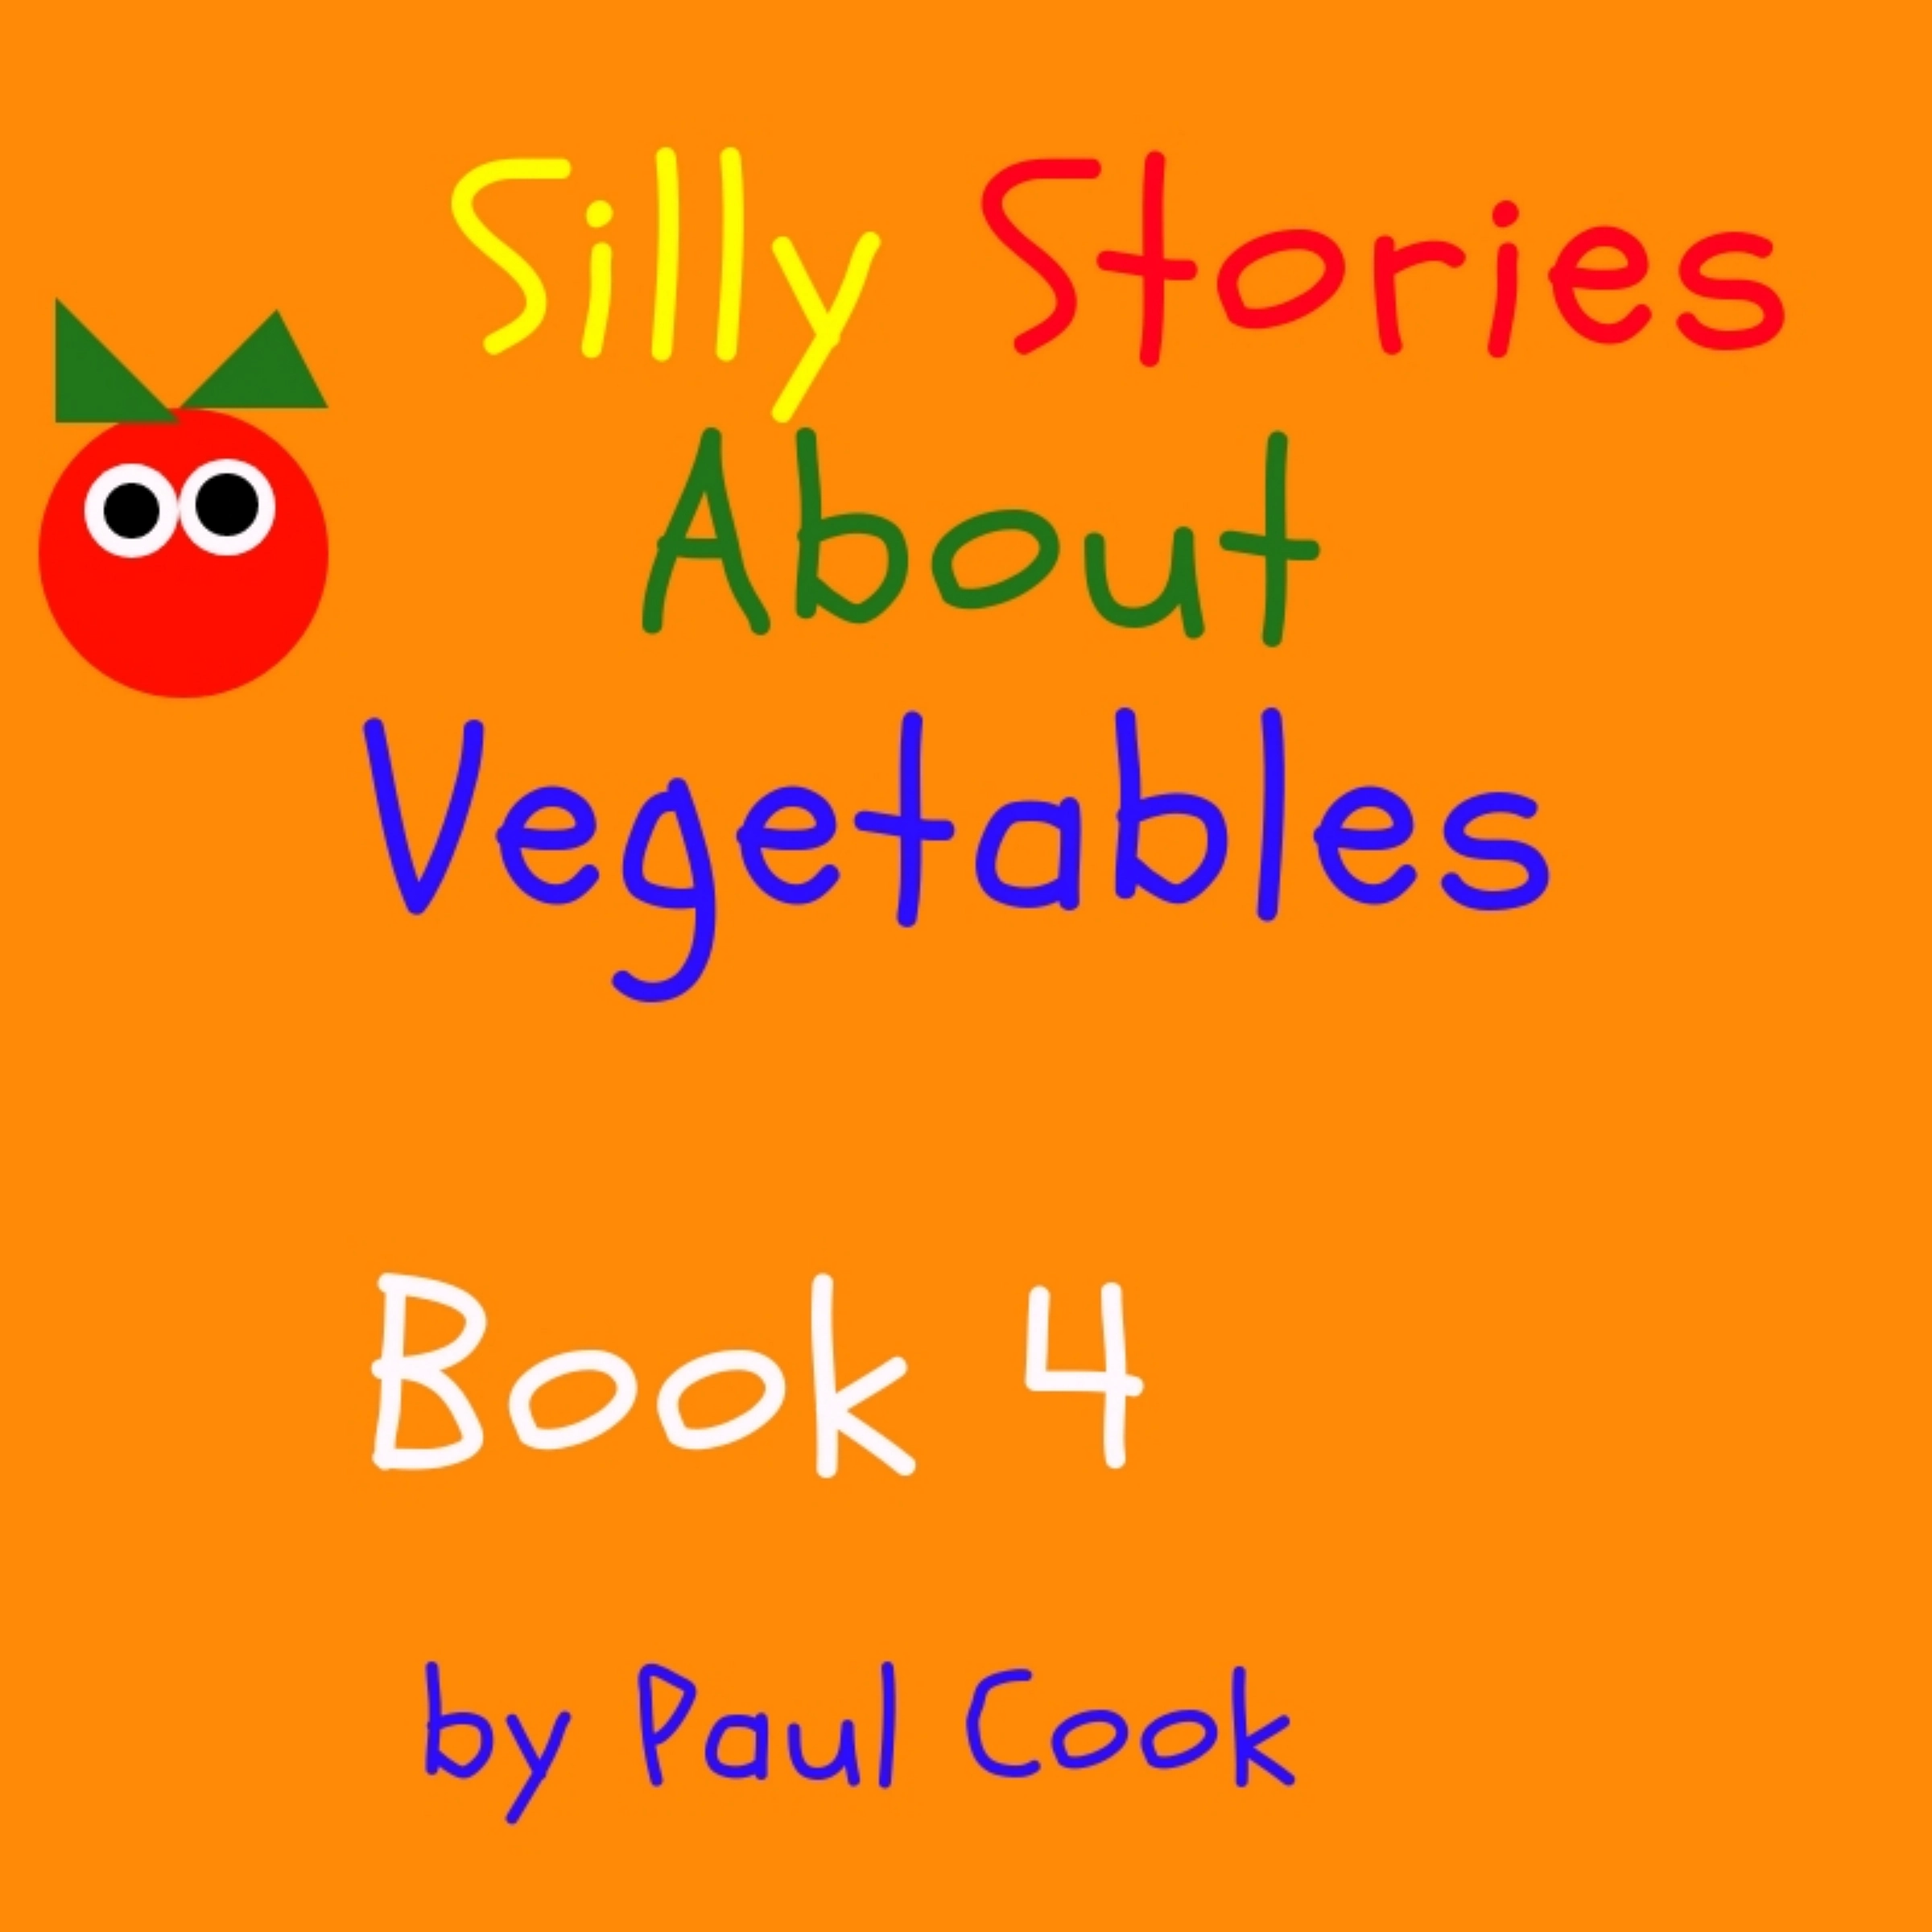 Silly Stories About Vegetables Book 4 by Paul Cook